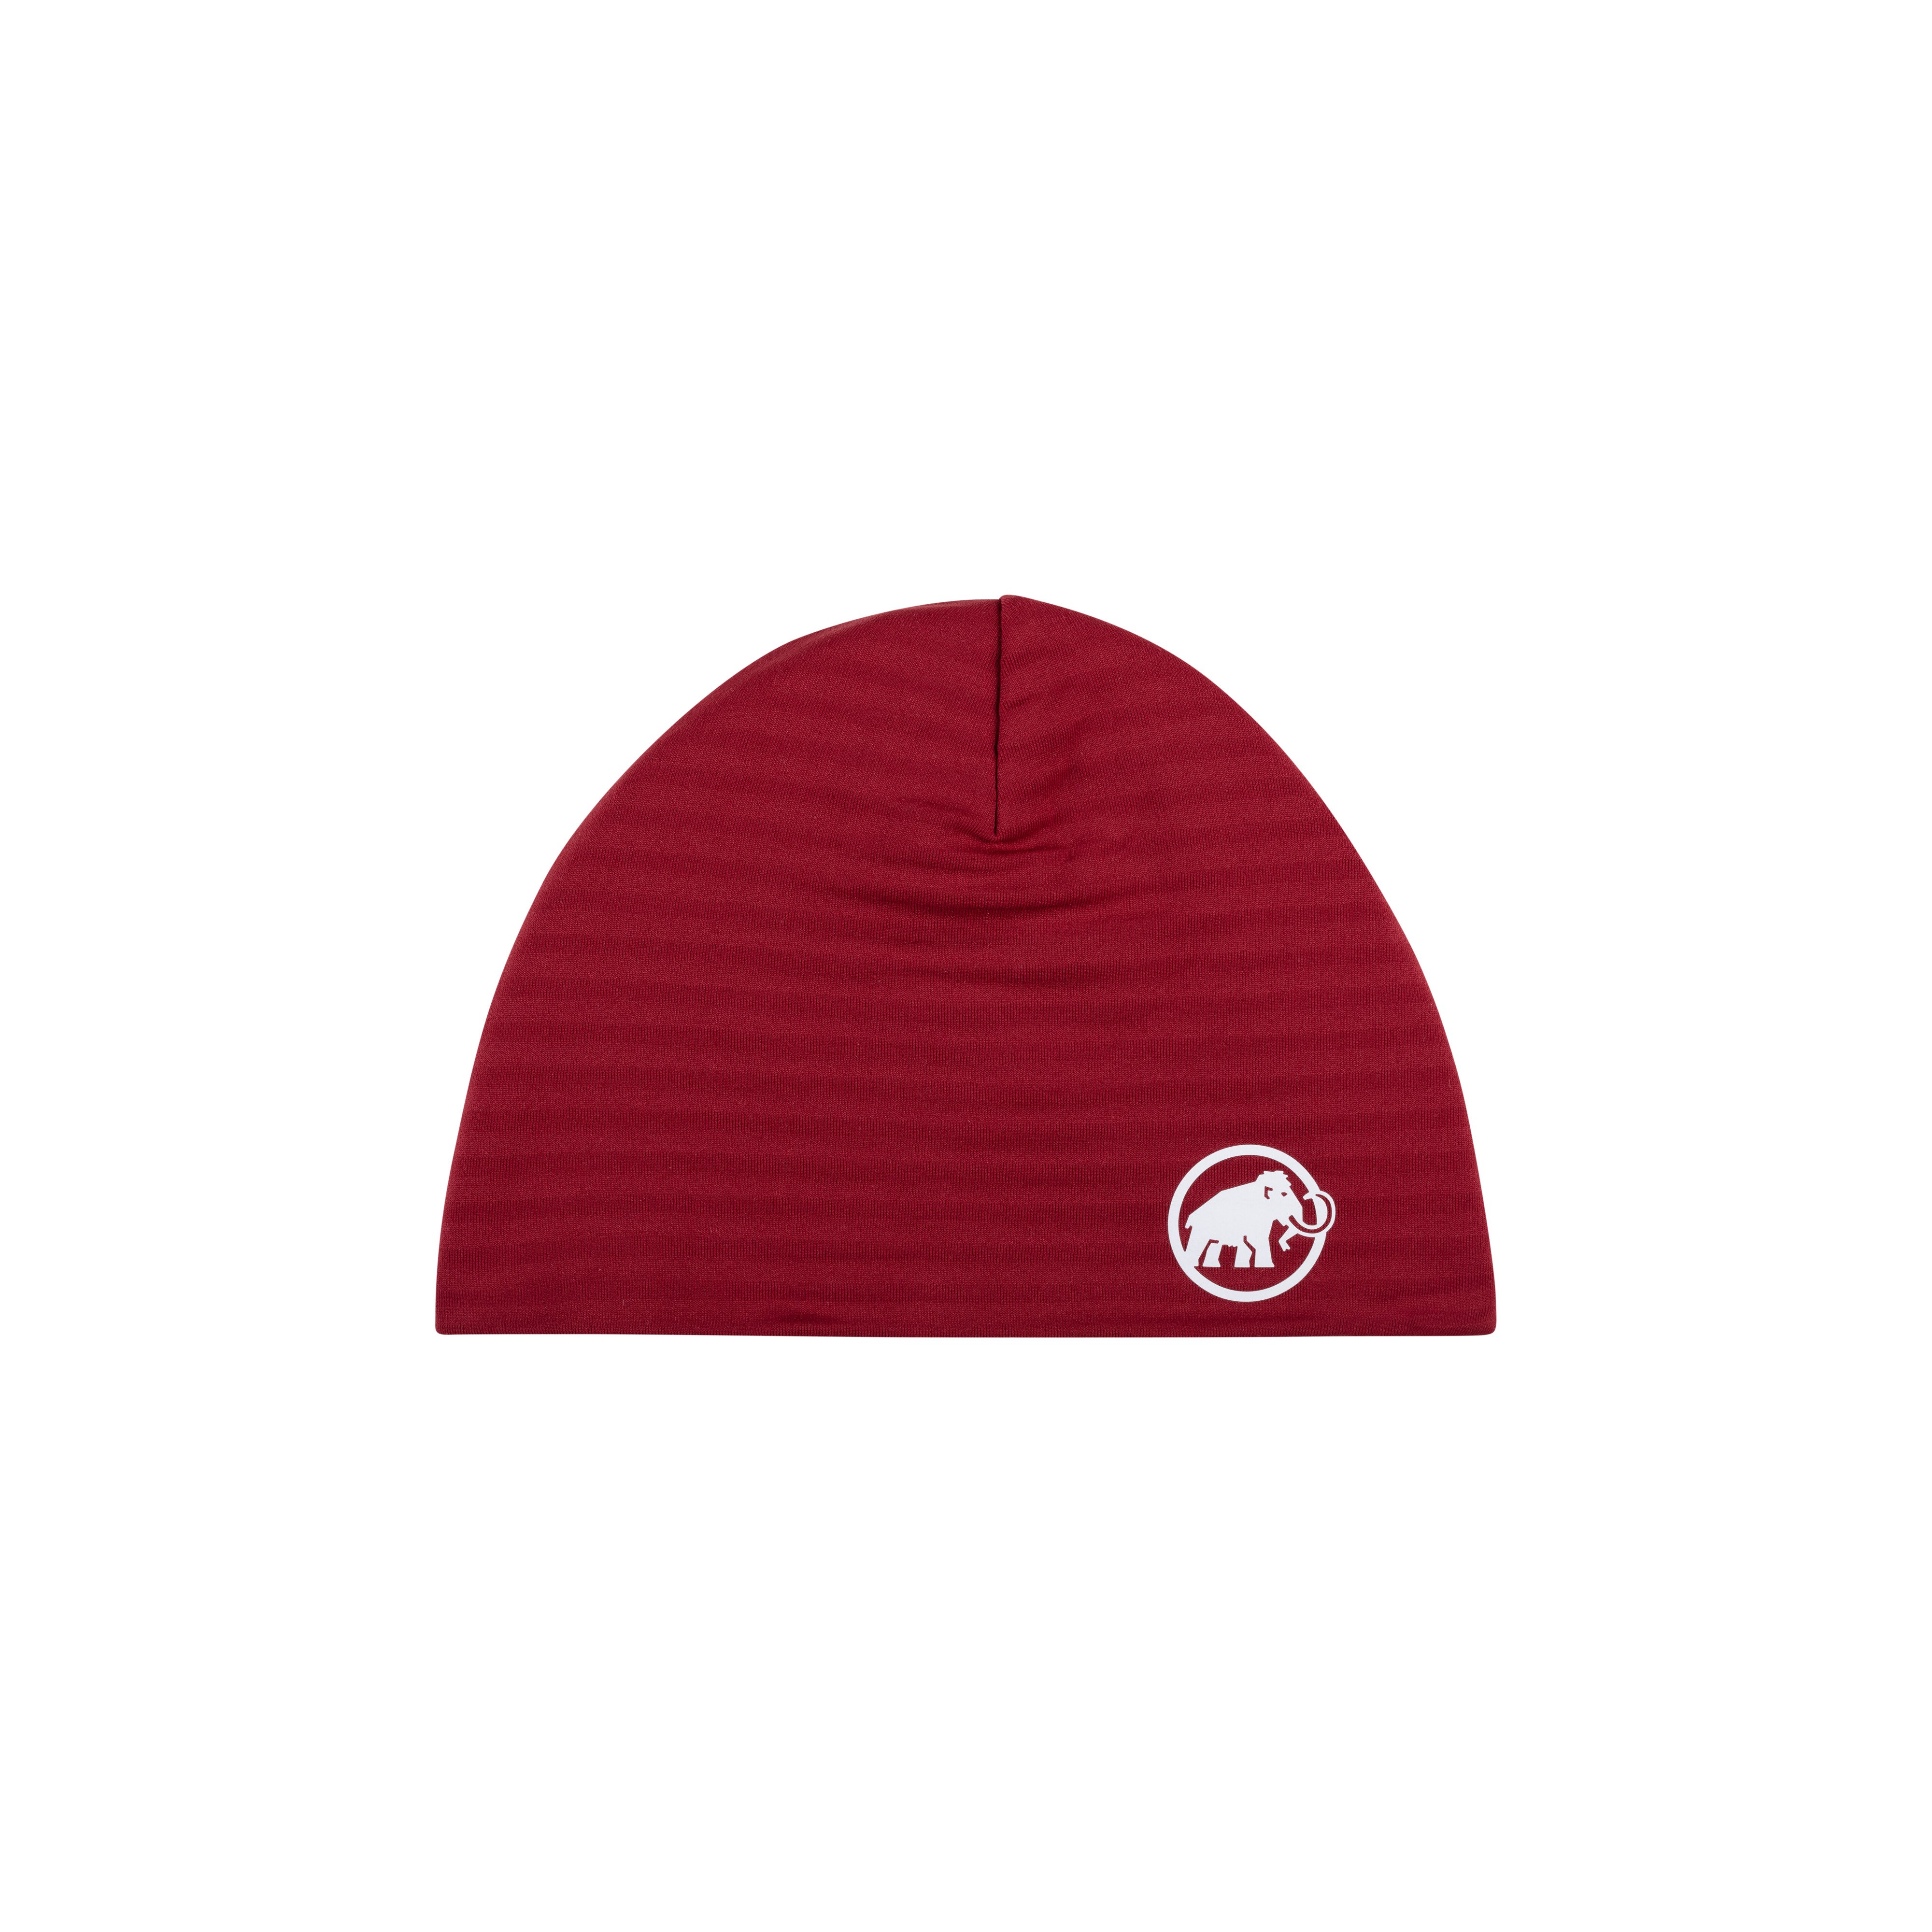 Aconcagua Light Beanie - blood red, one size product image